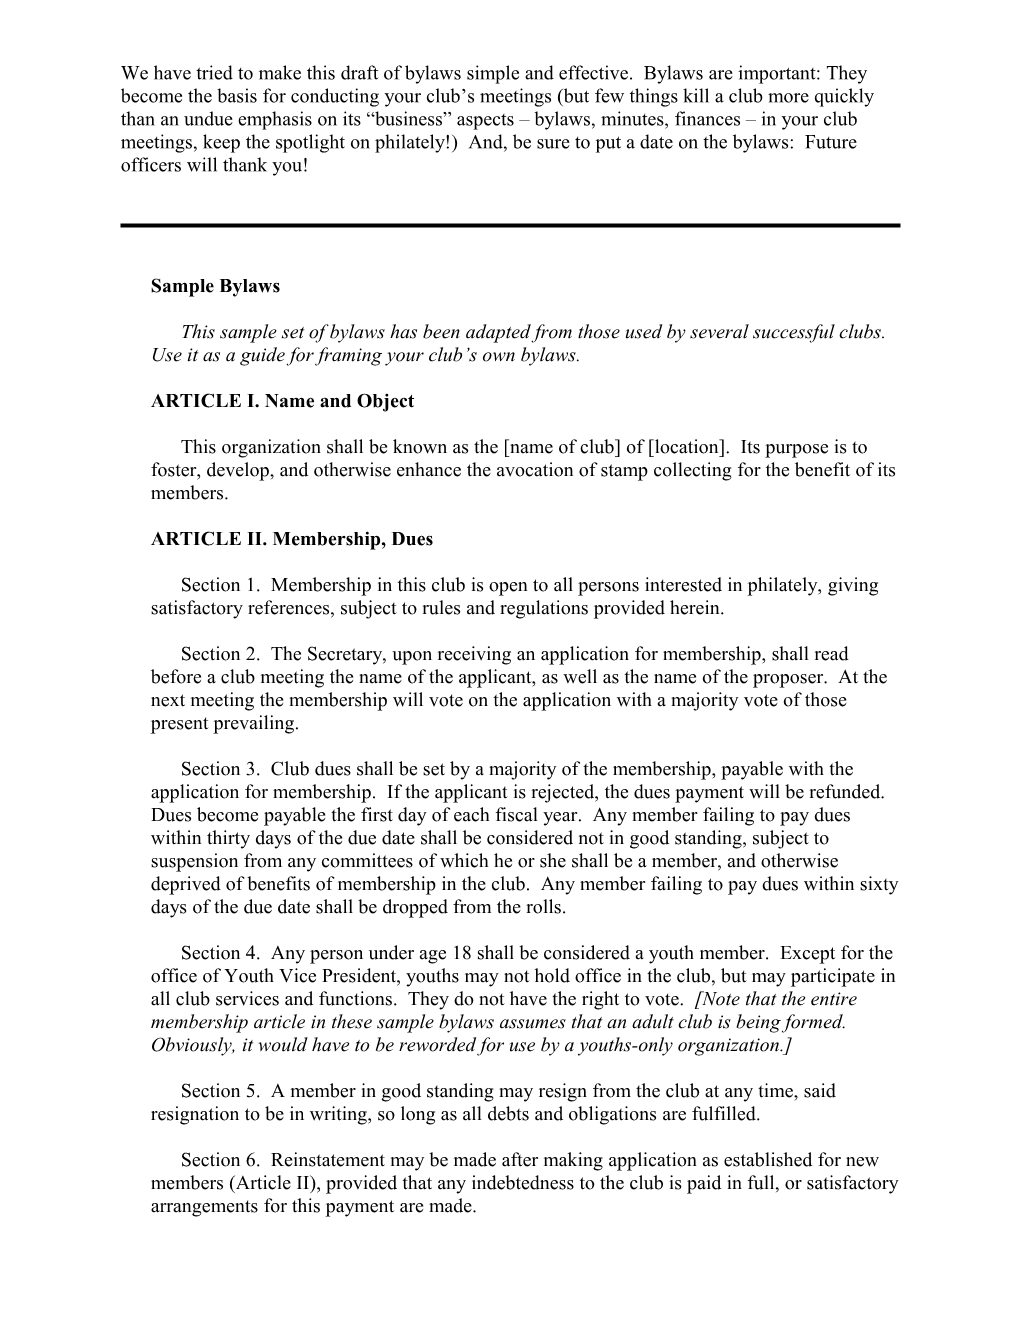 We Have Tried to Make This Draft of Bylaws Simple and Effective